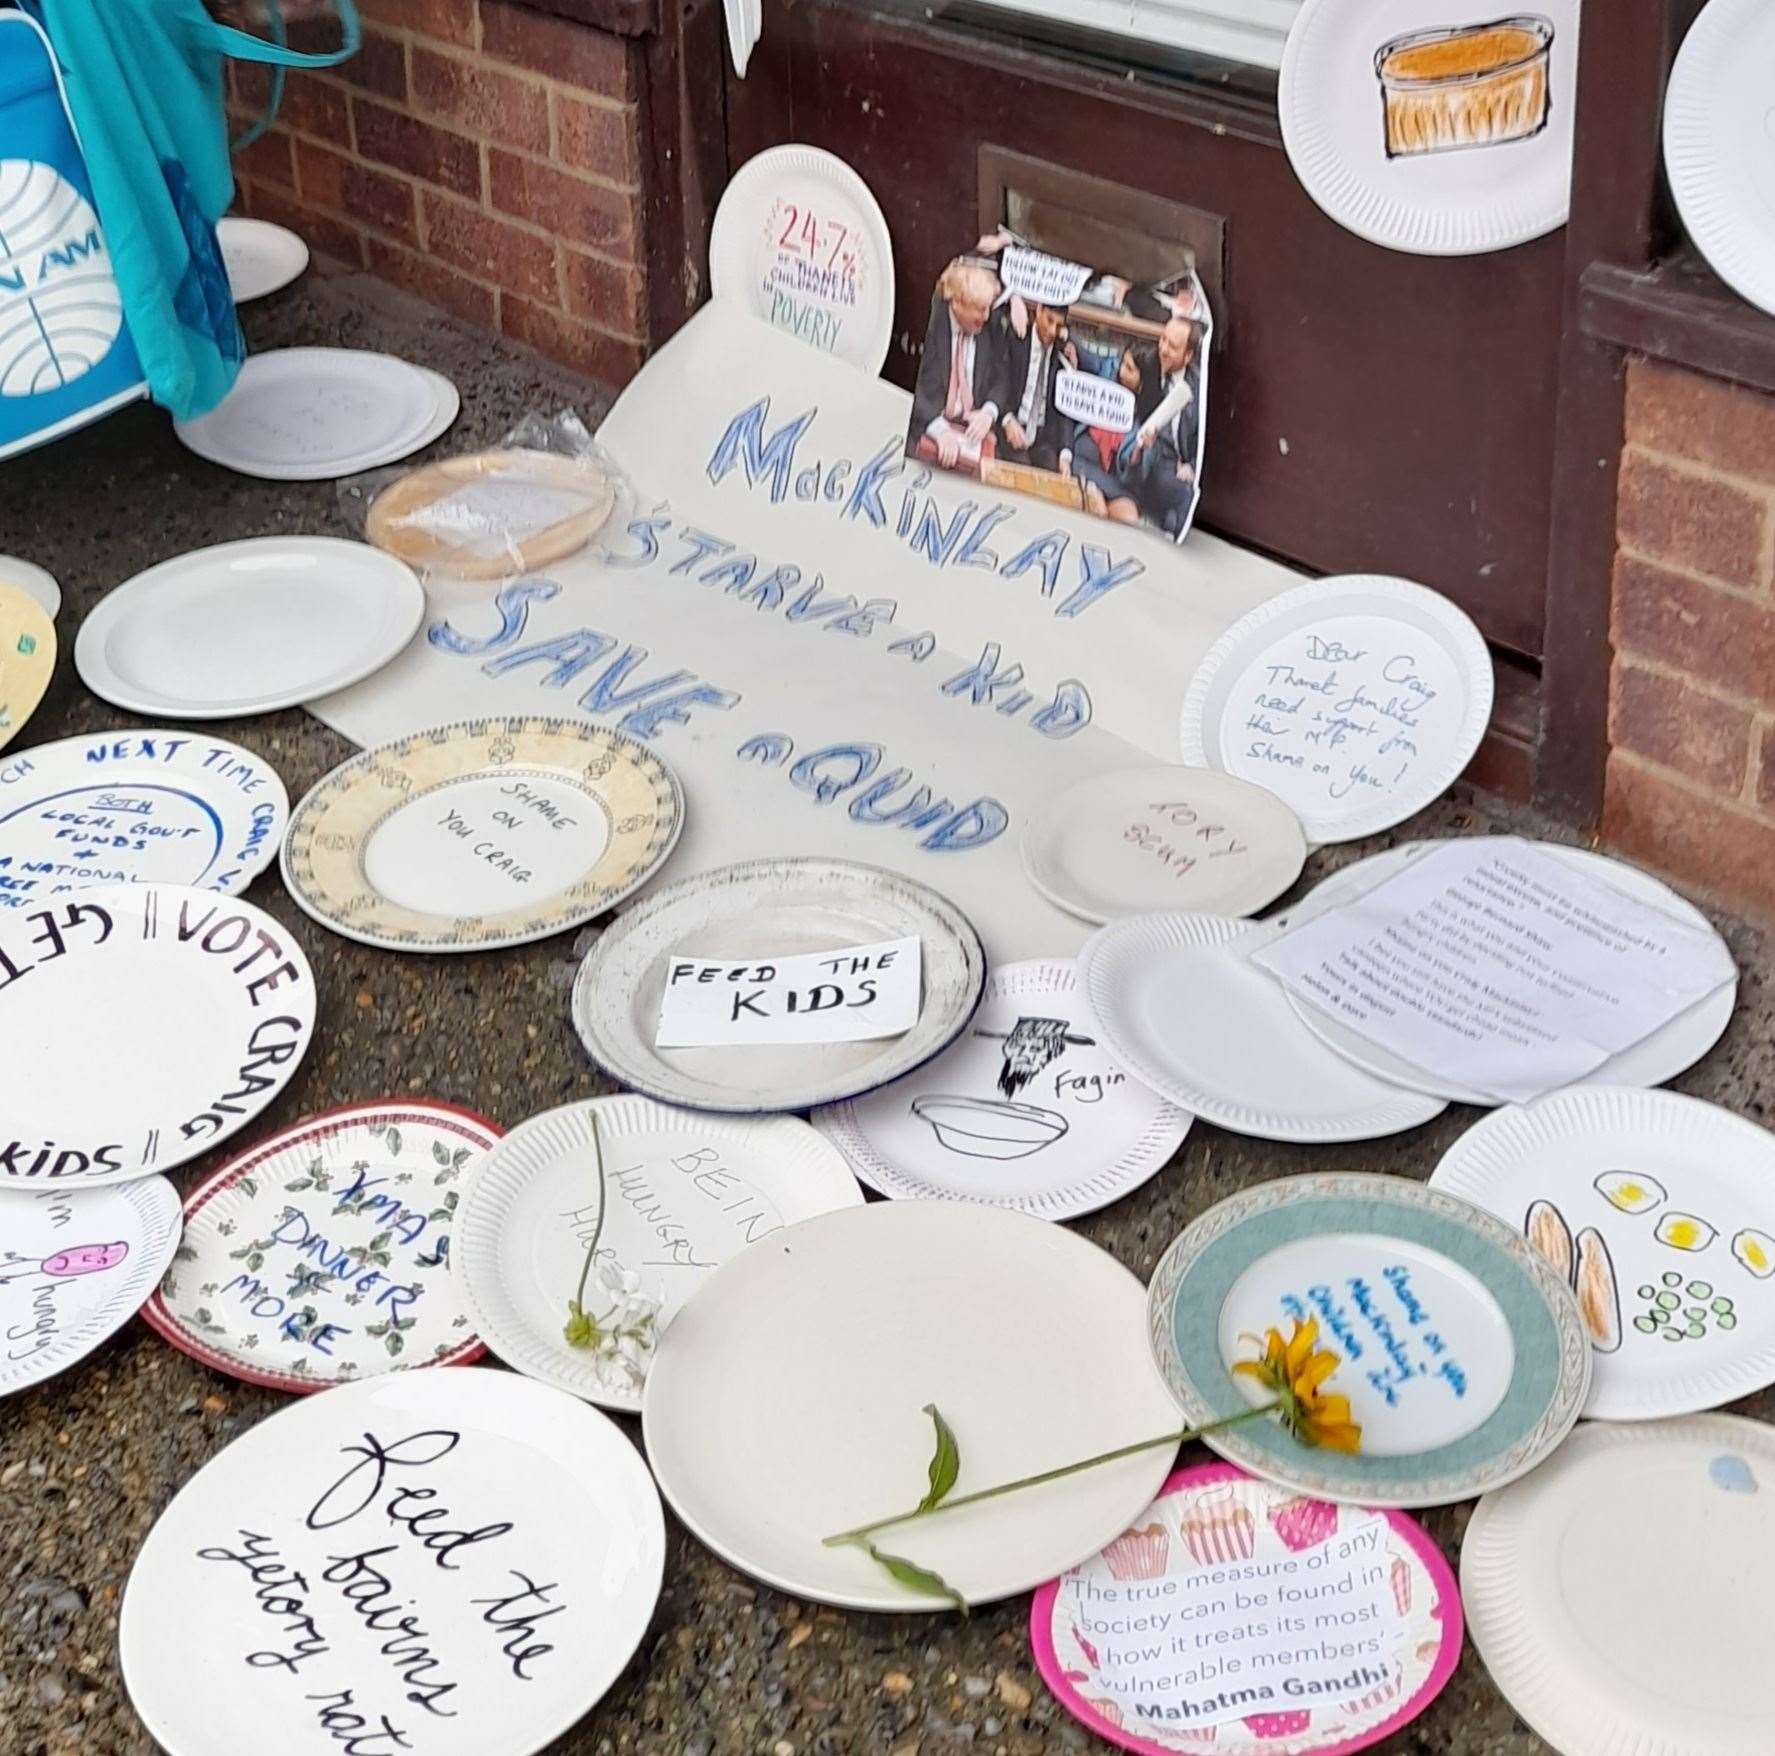 More than 80 plates were laid outside the MP's office in Broadstairs